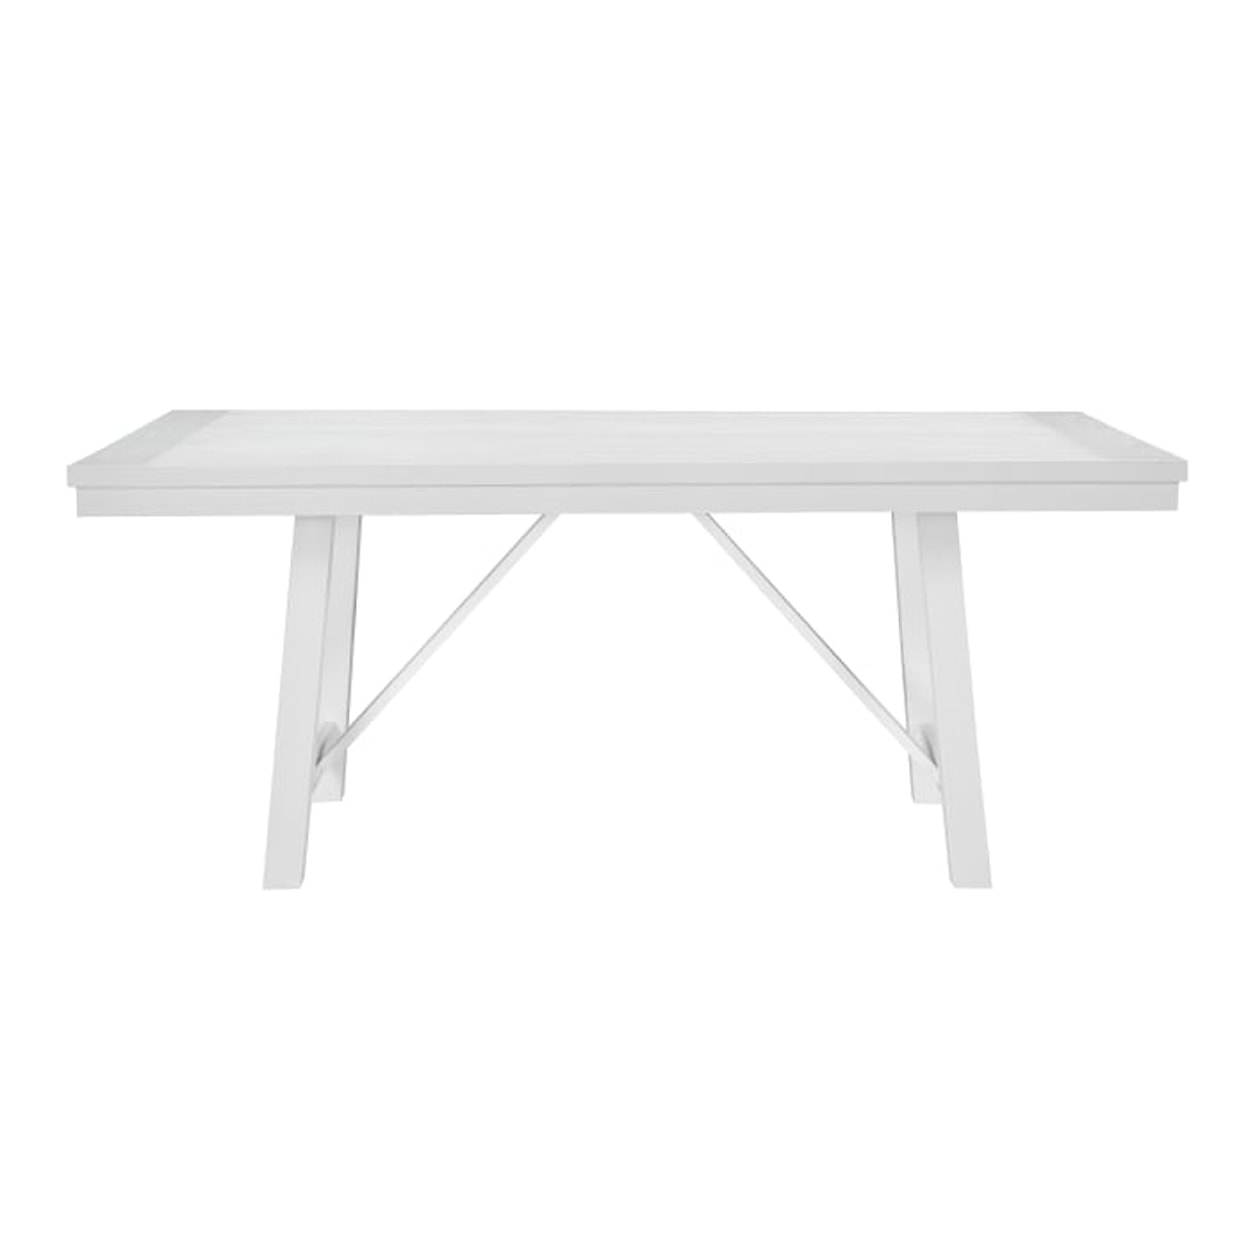 Homelegance Miscellaneous Dining Table